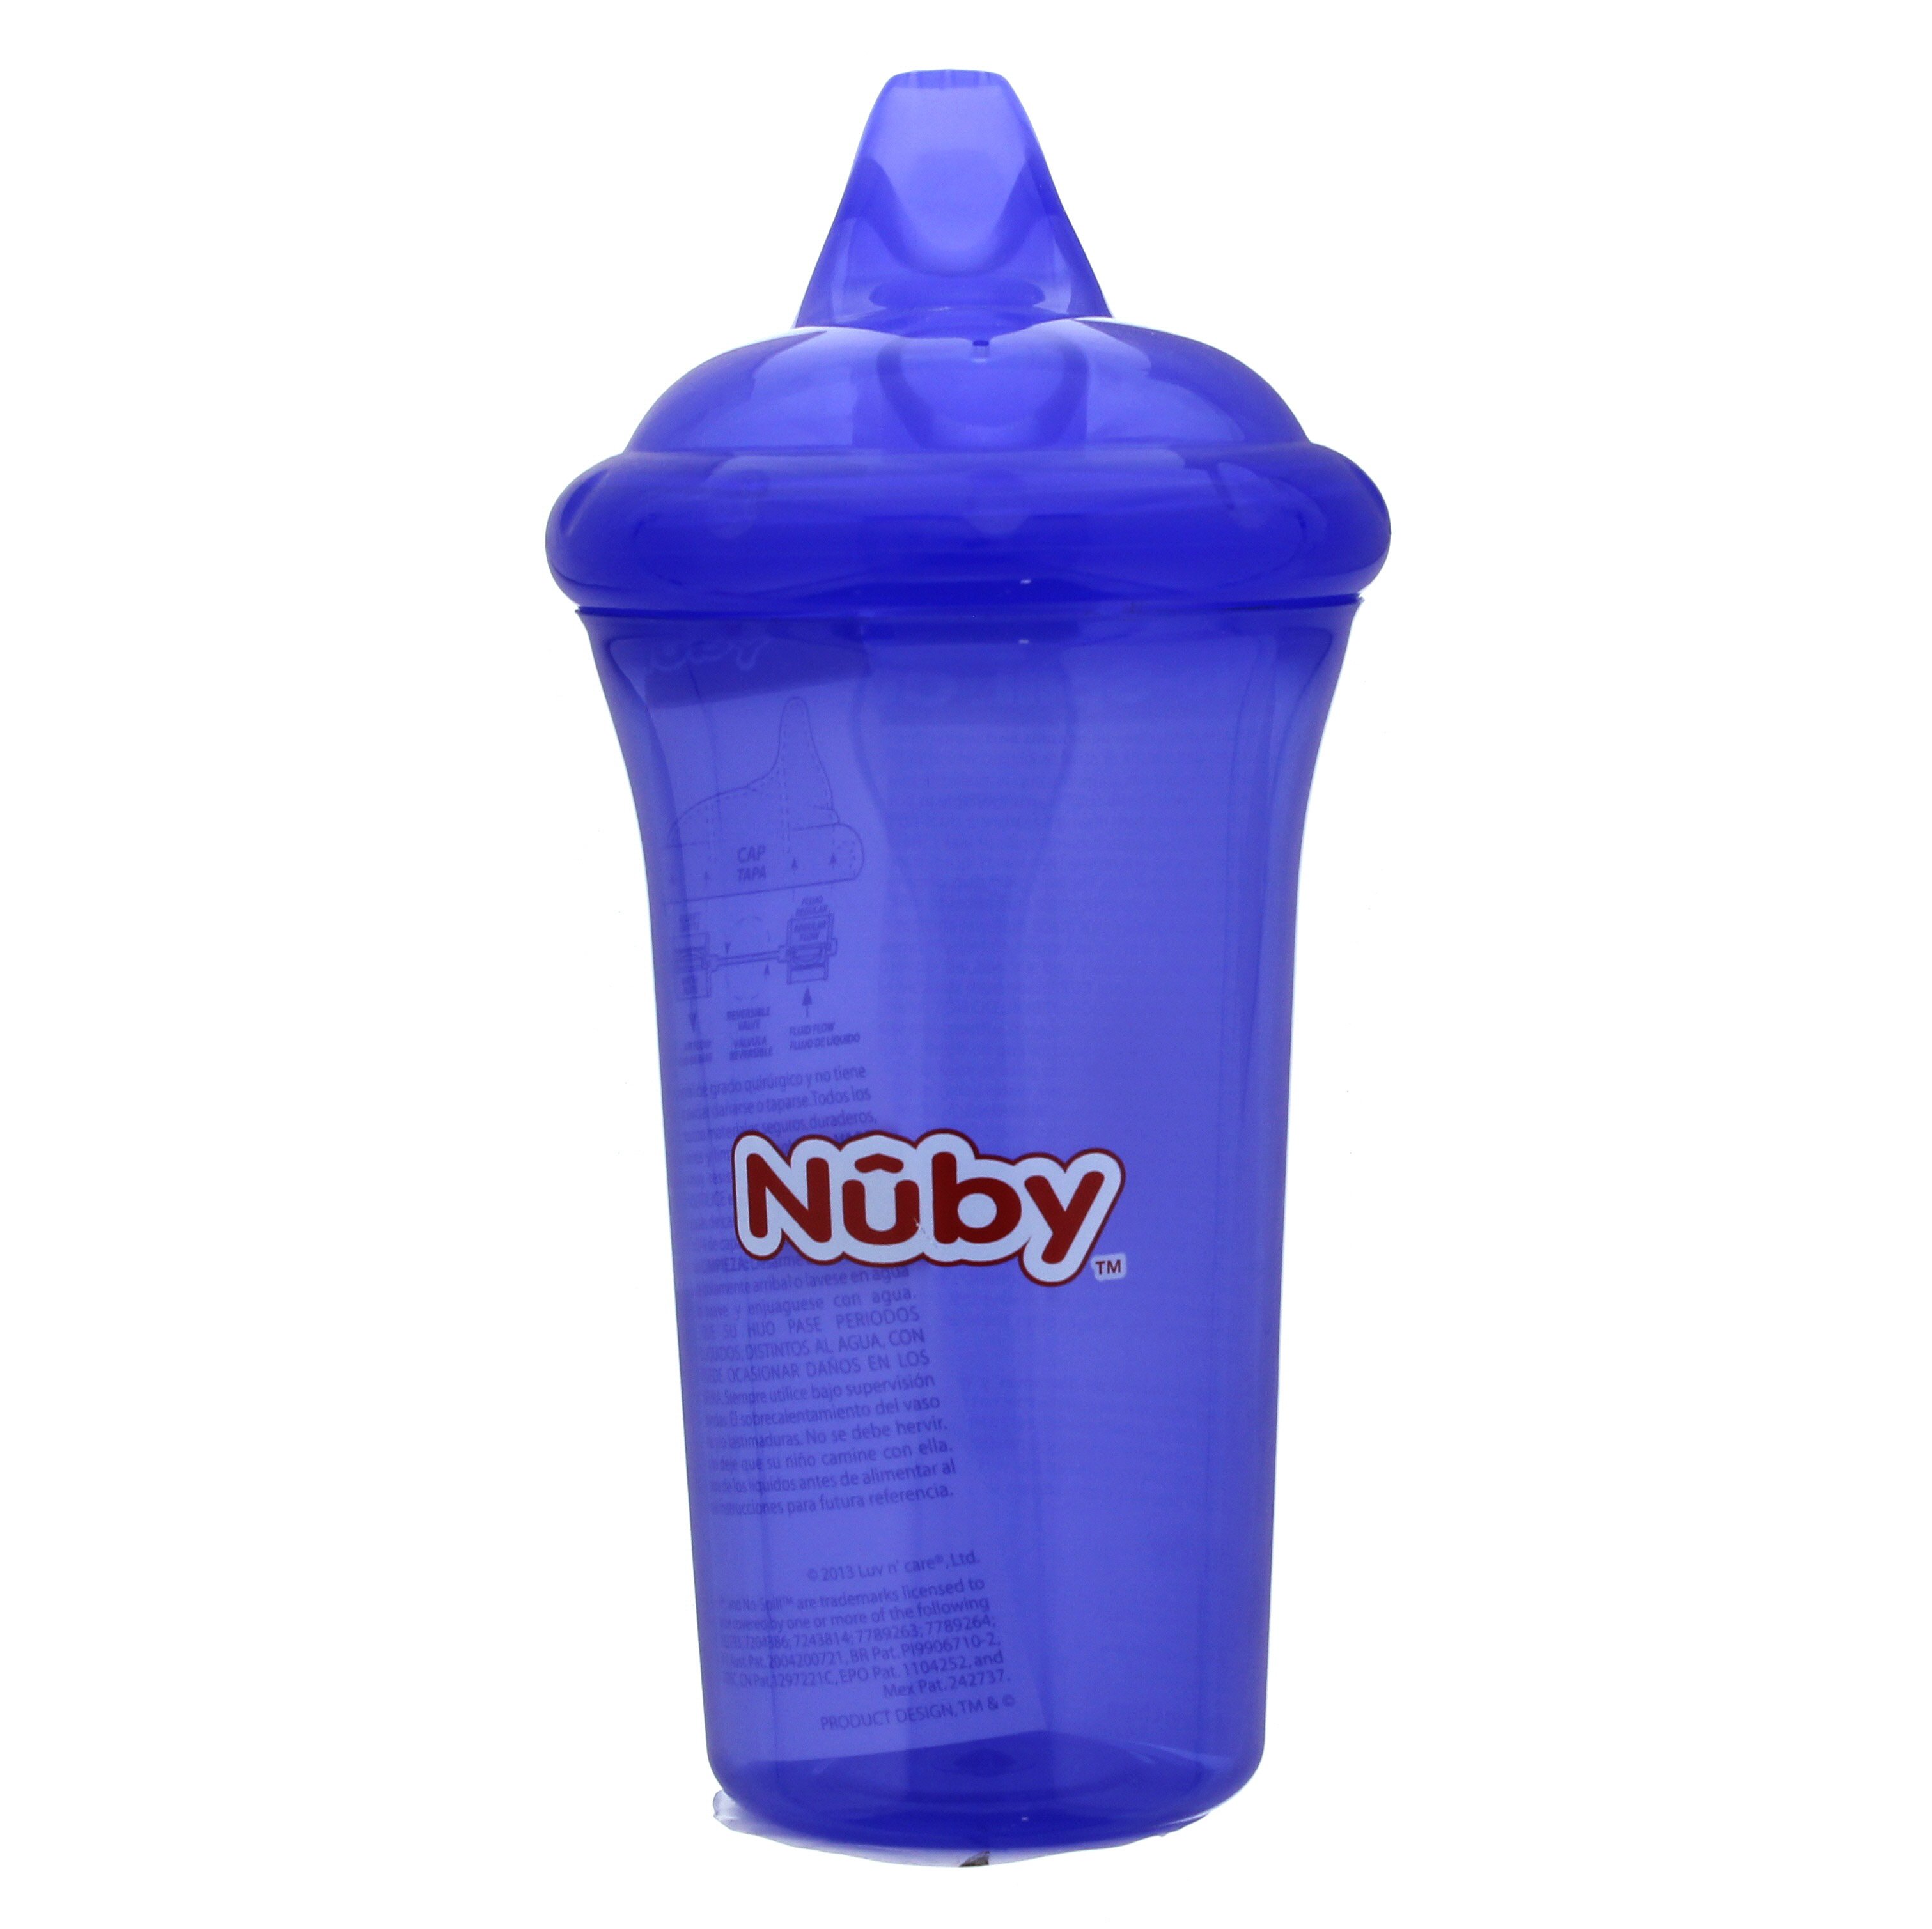 Nuby No-Spill Hard Top Cup 9 OZ, Assorted Colors - Shop Cups at H-E-B